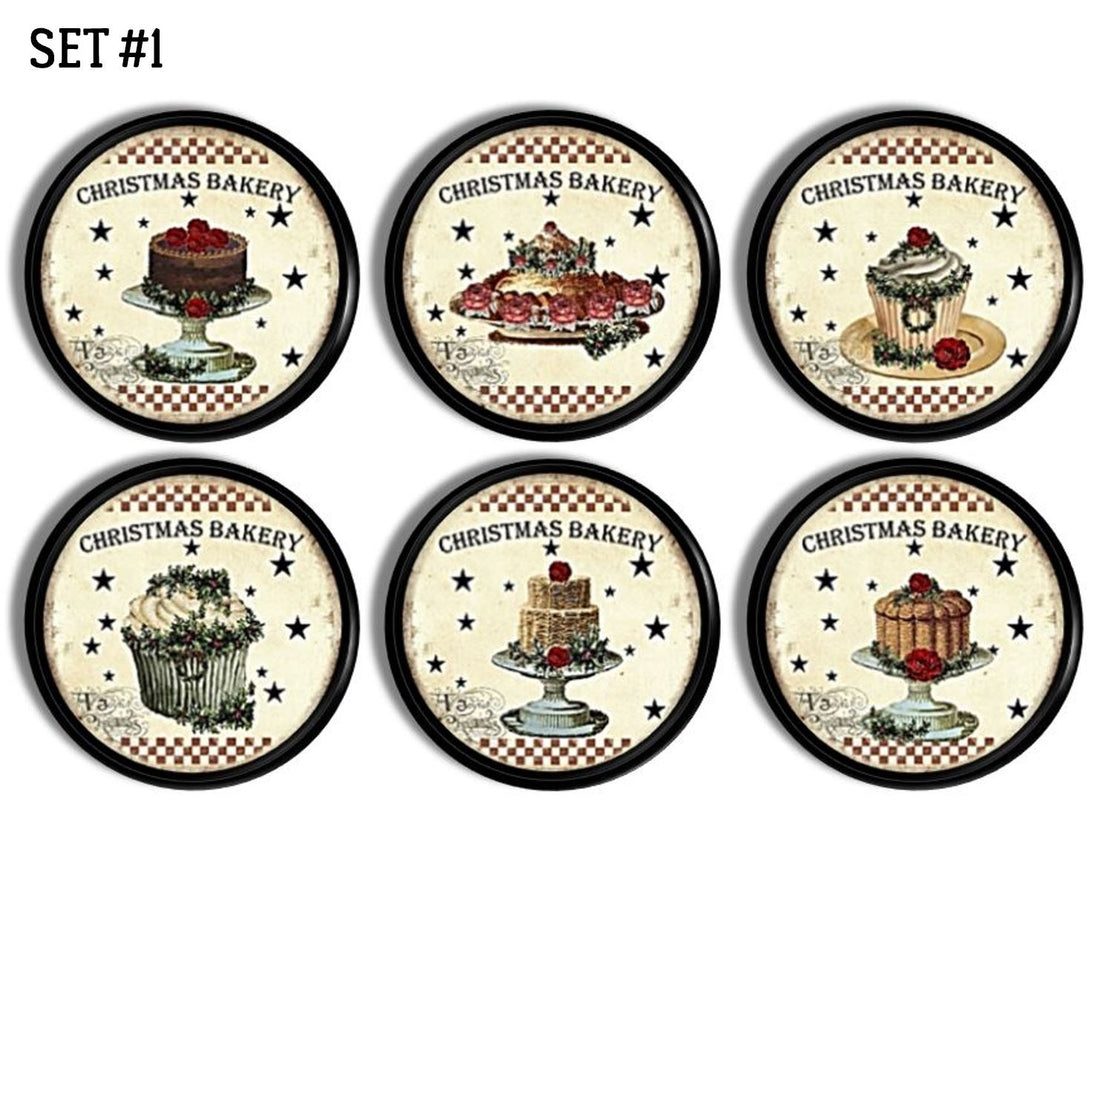 6 Baking themed decorative kitchen cabinet knobs. Christmas holiday cupcakes, cakes and pies in an antique primitive style on a black drawer pull.